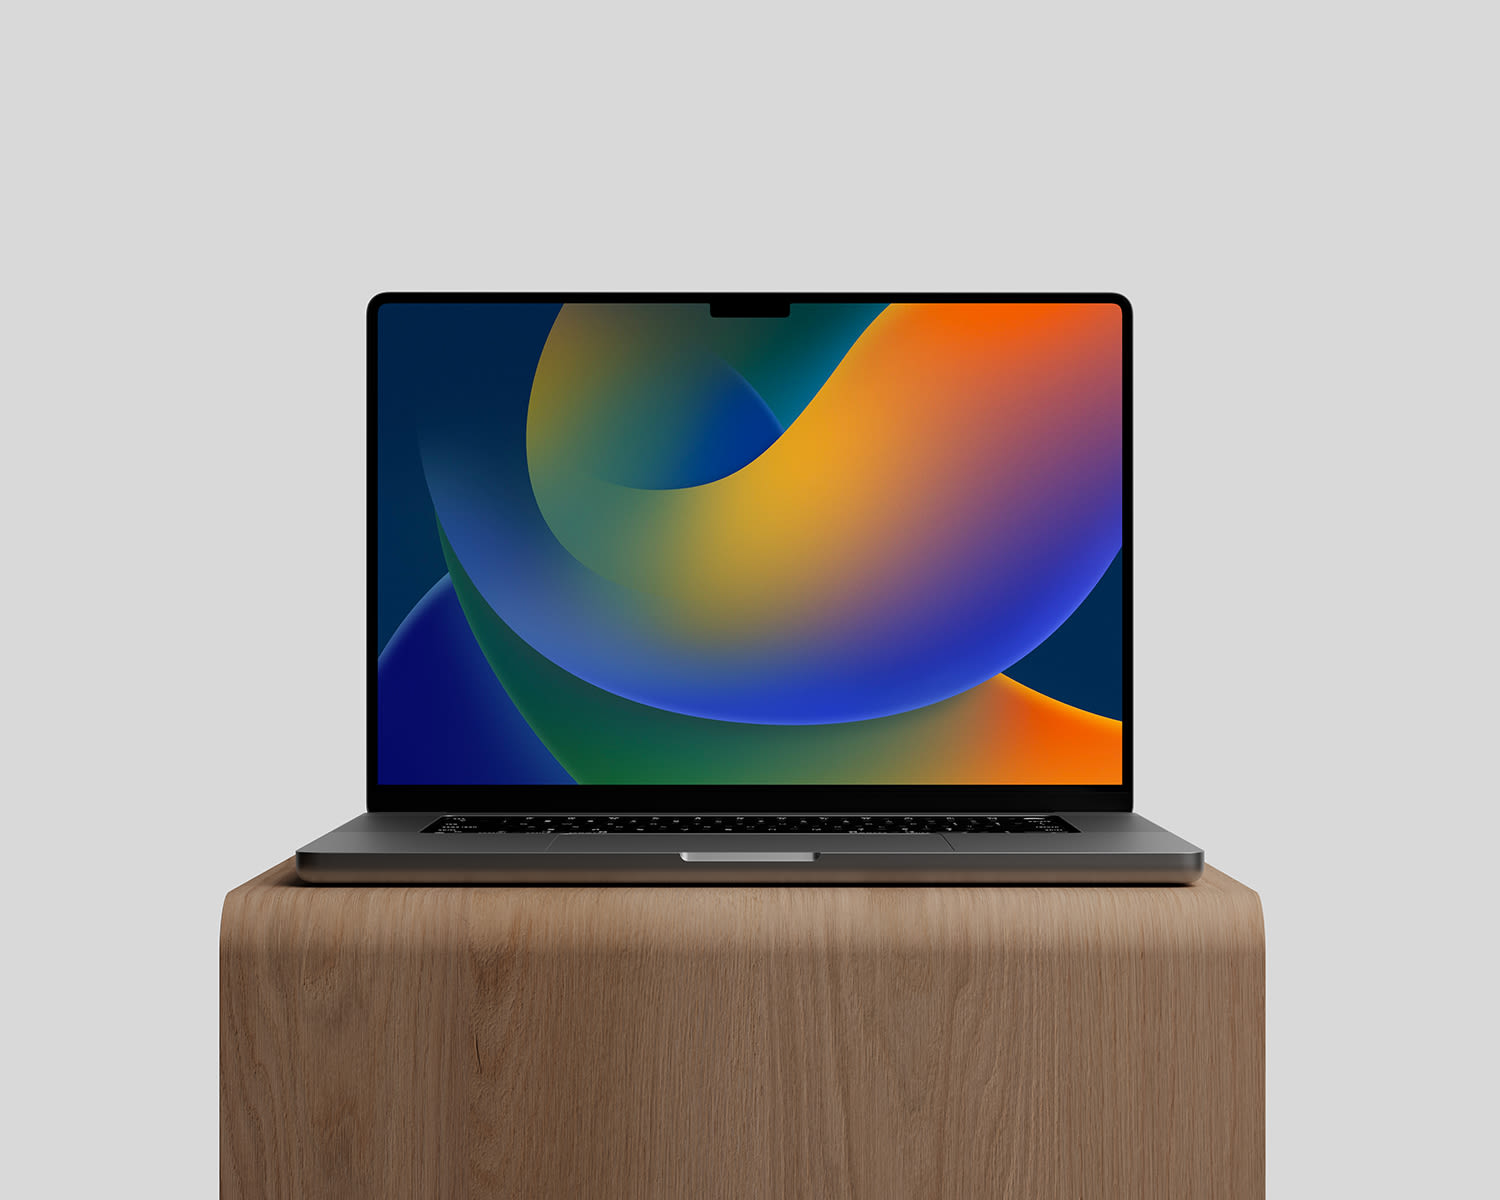 M2 MacBook Pro on Wood Stand Mockup by Anthony Boyd Graphics